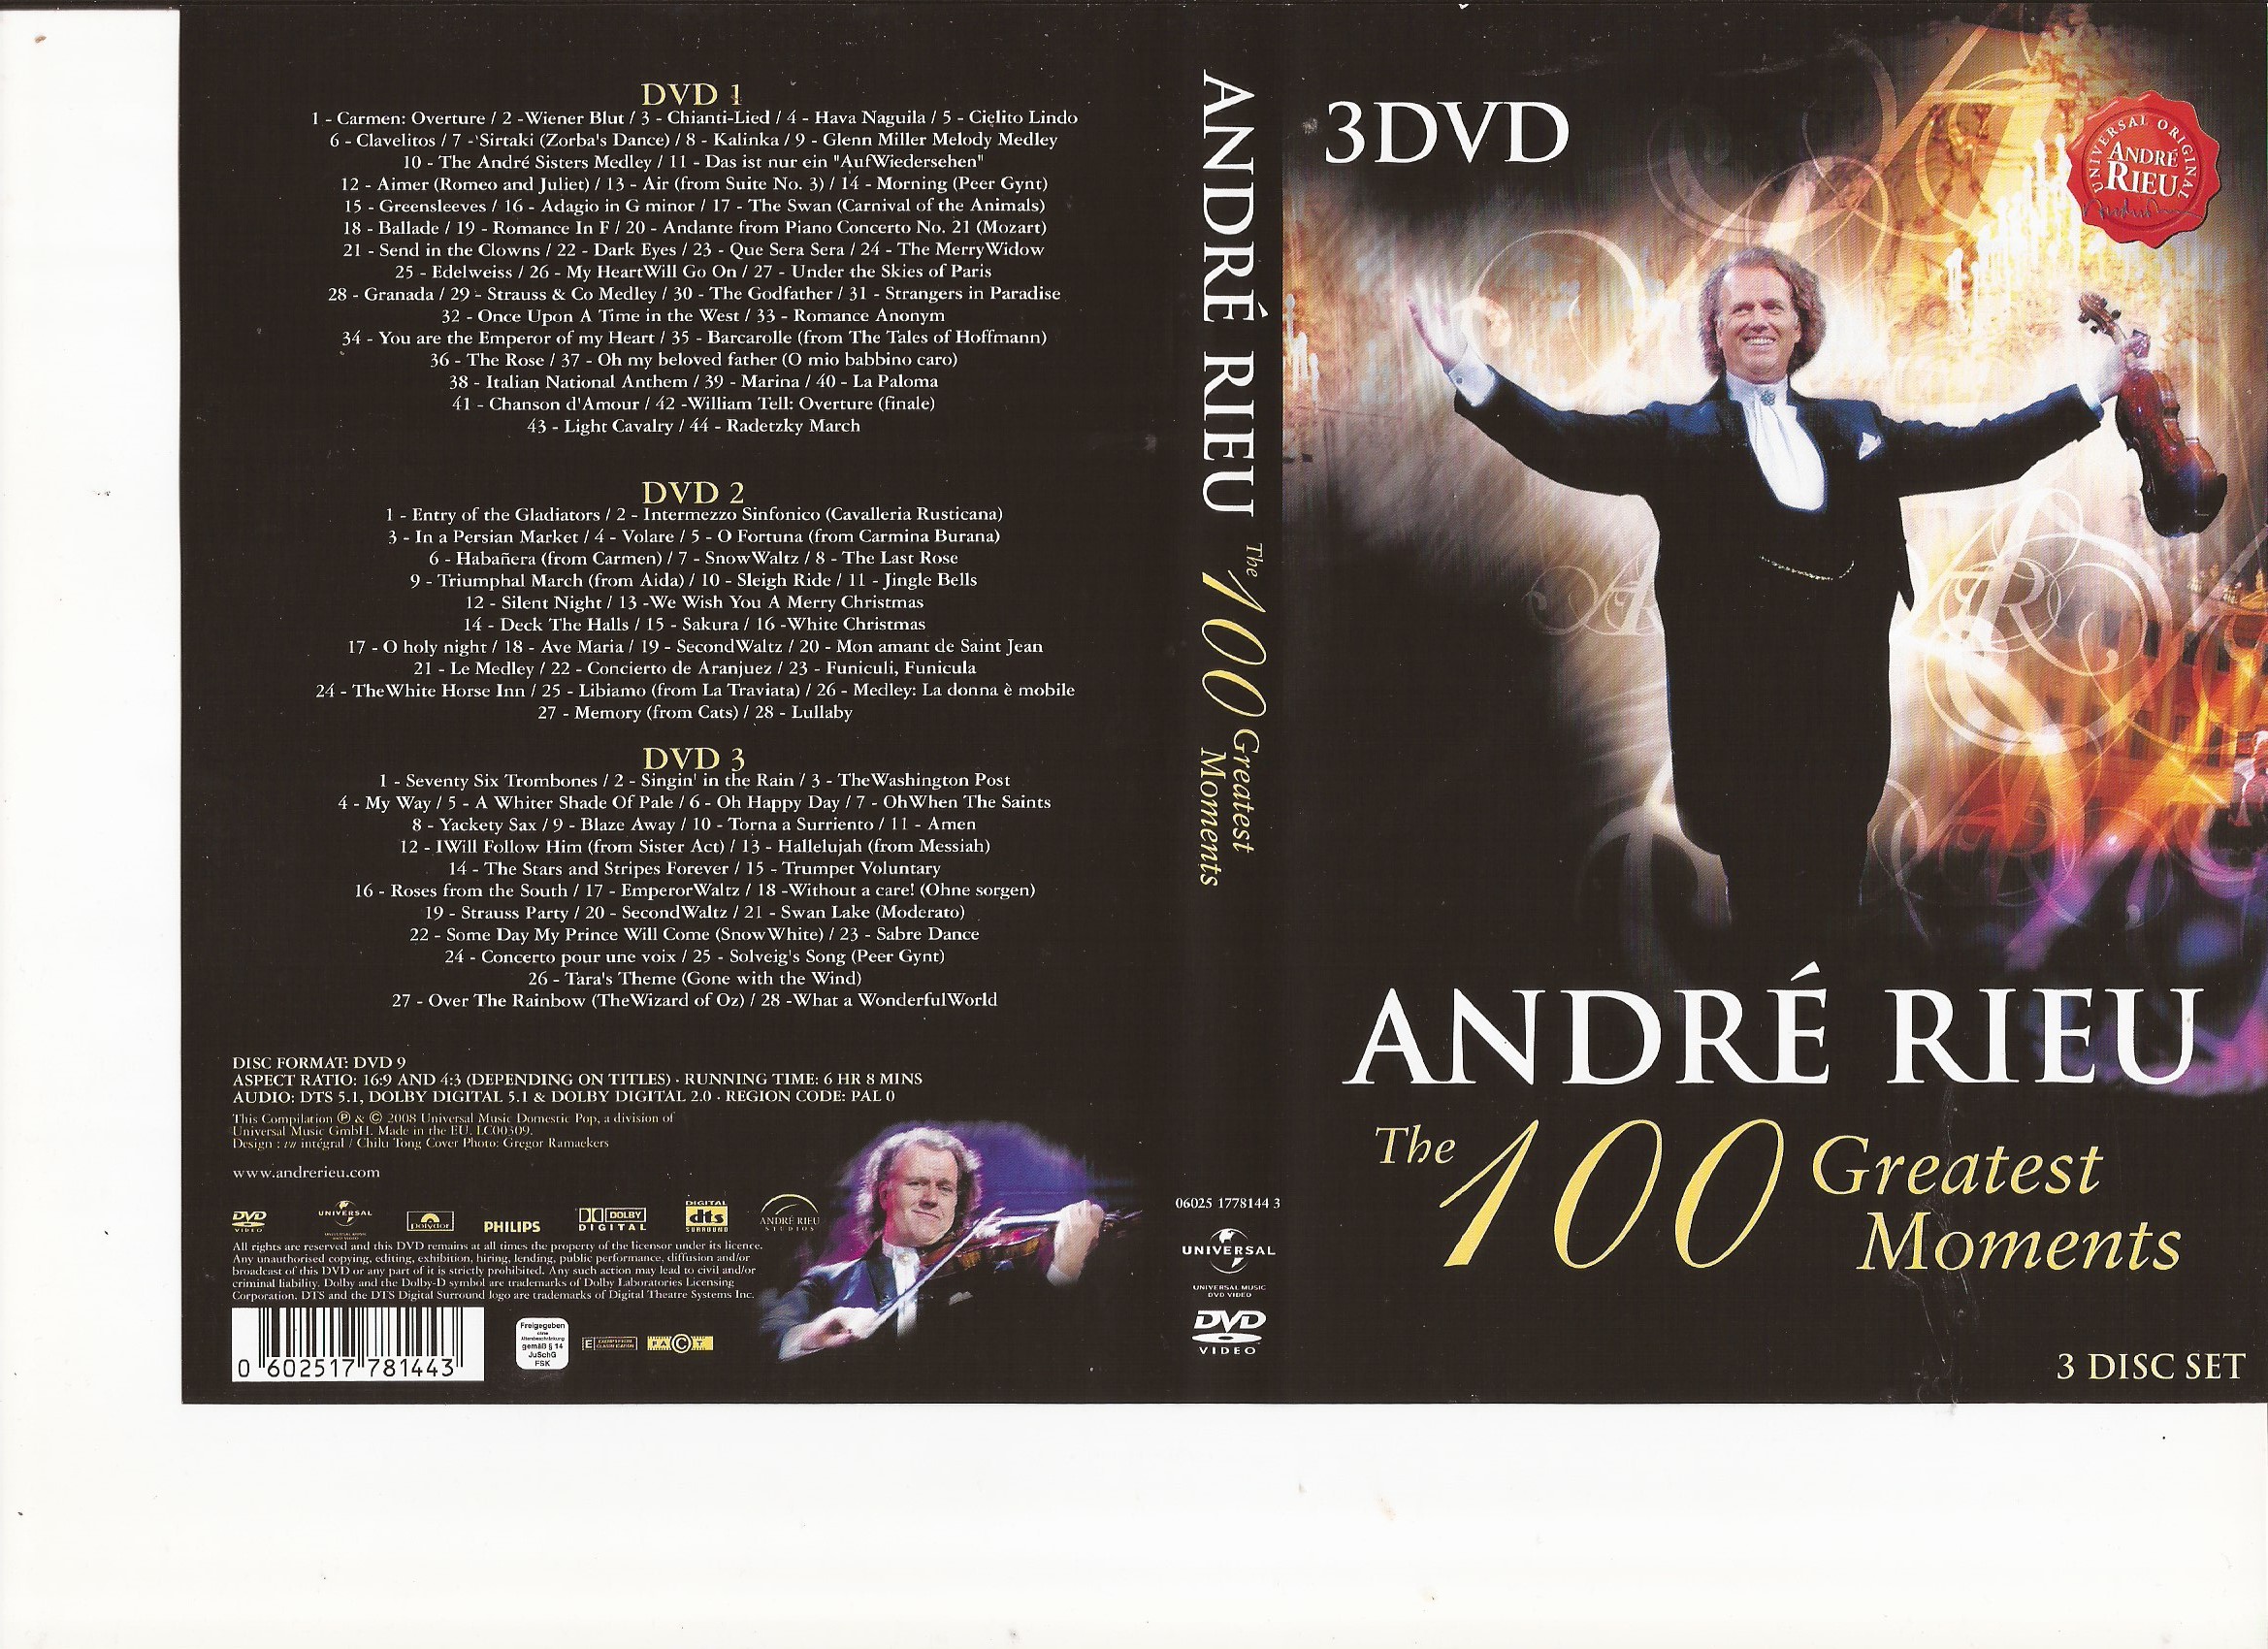 Andre Rieu 100 greatest moments 3 DVD's